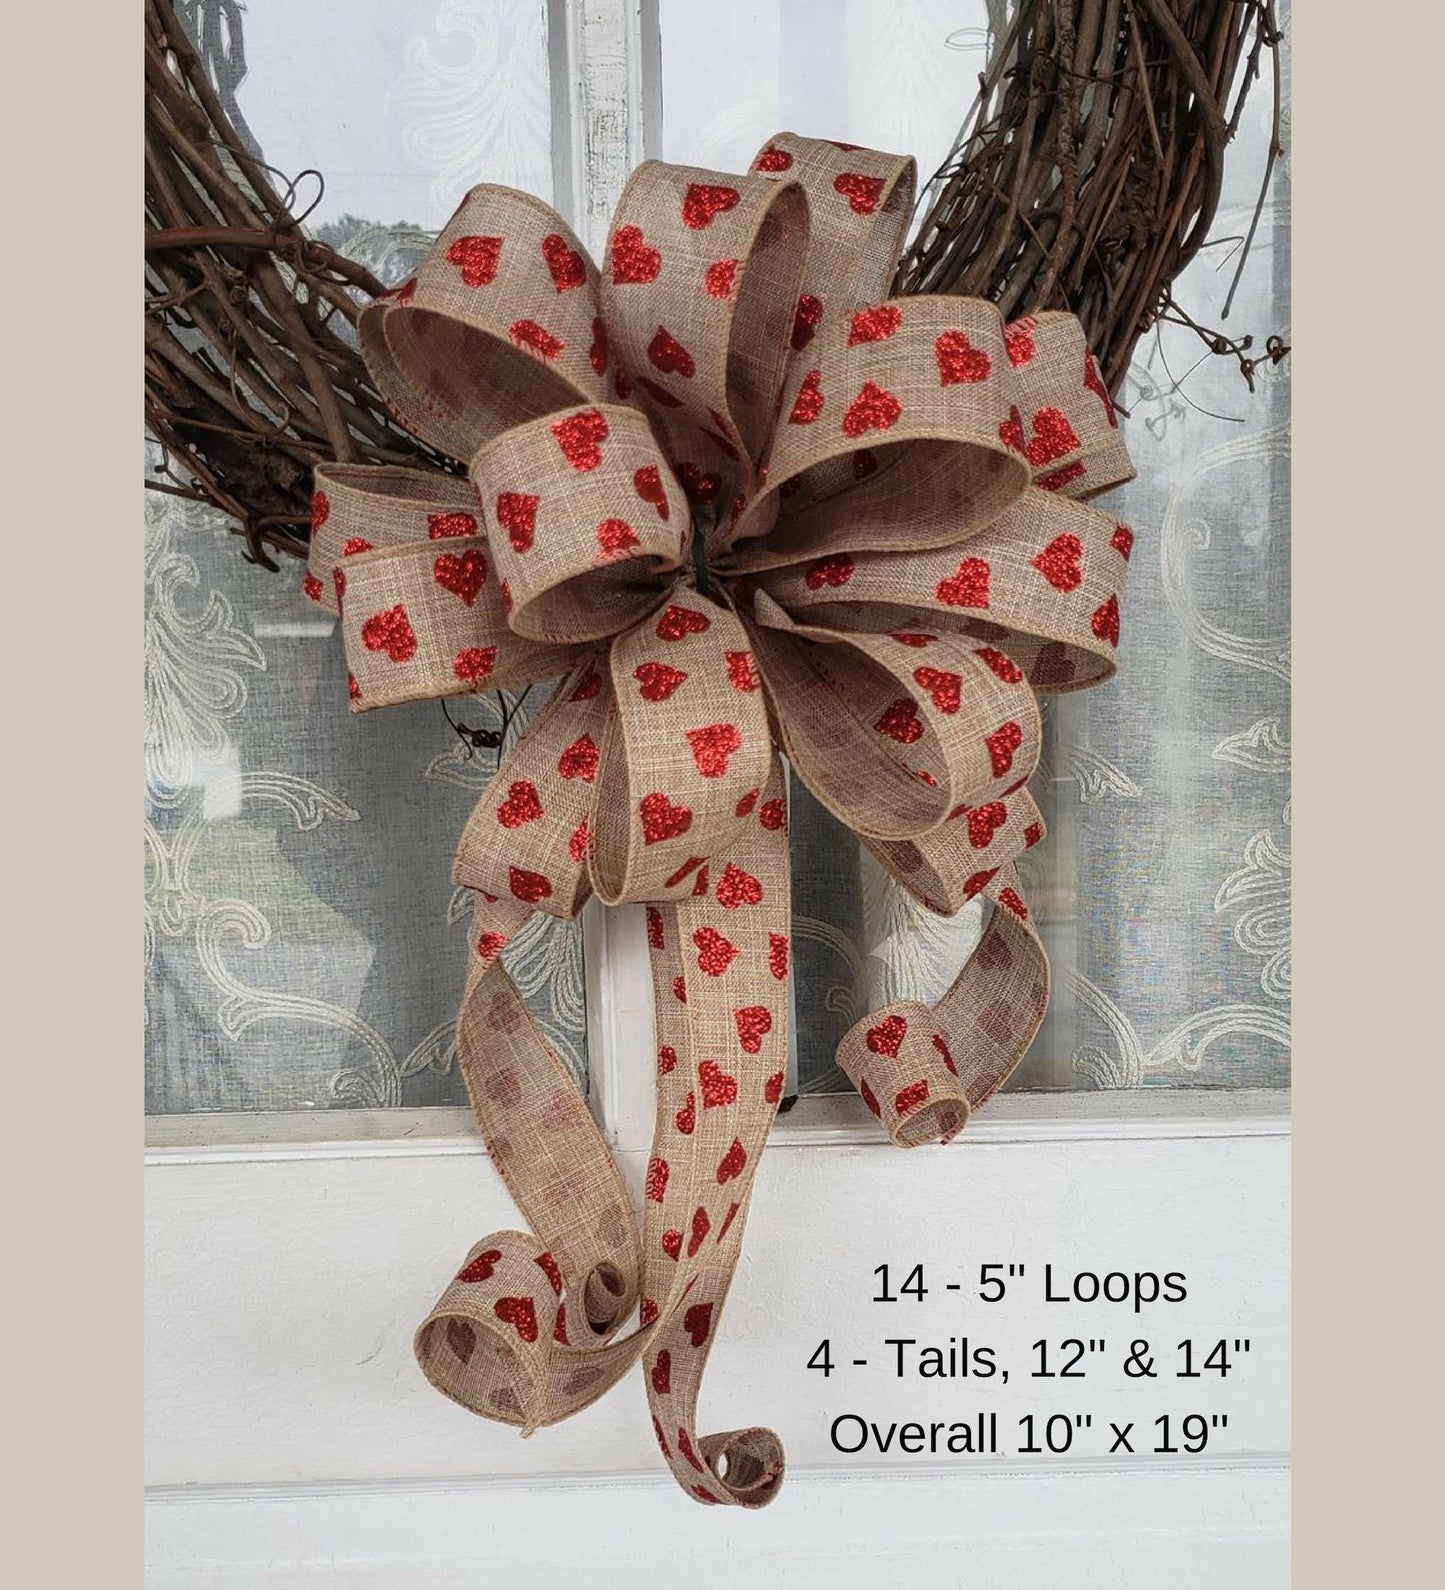 Red Glitter Heart Rustic Wreath Bow, Valentines Day Decor for front door, Valentine's Bow for Lanterns or Mailboxes